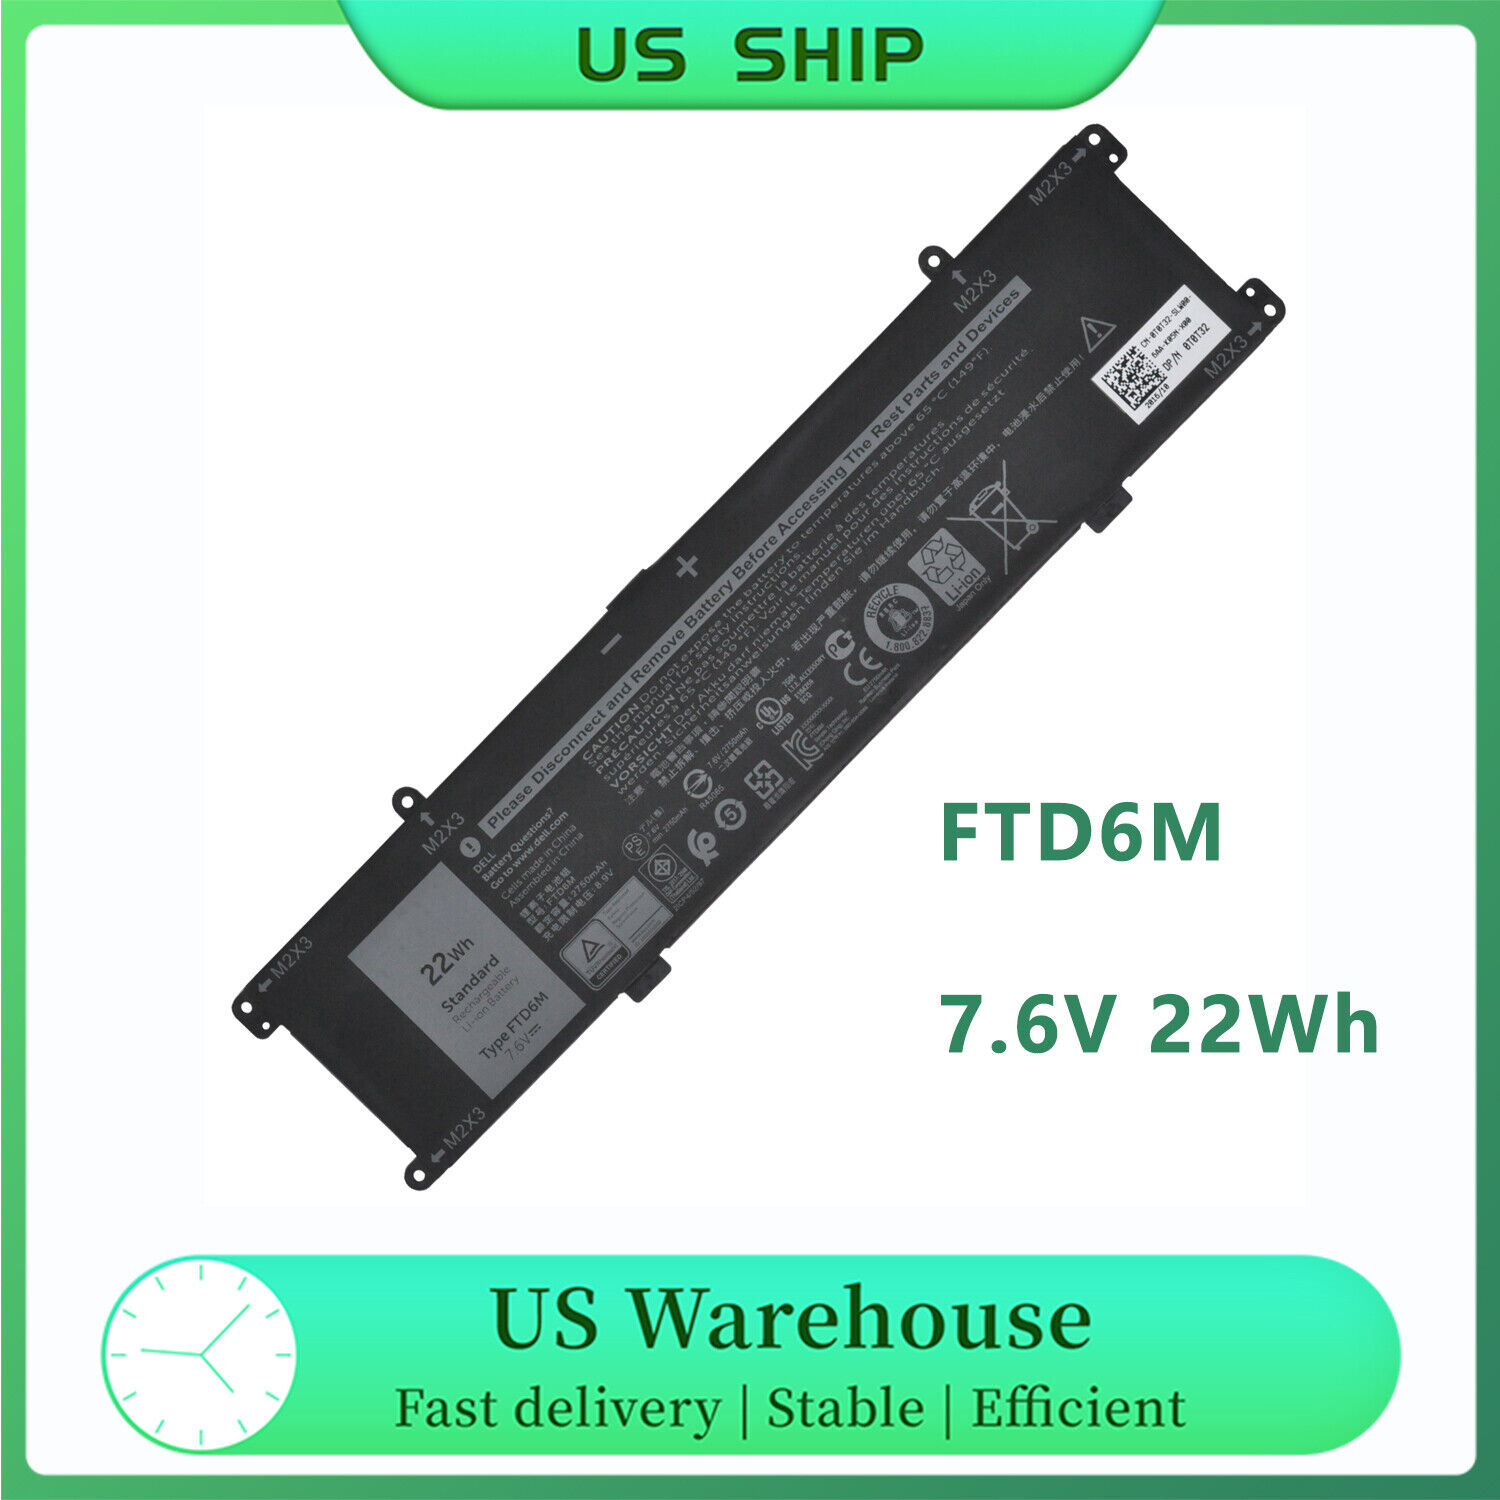 New FTD6M Battery For Latitude 7285 2-in-1 Keyboard 6HHW5 K17M GC02002190L 22Wh